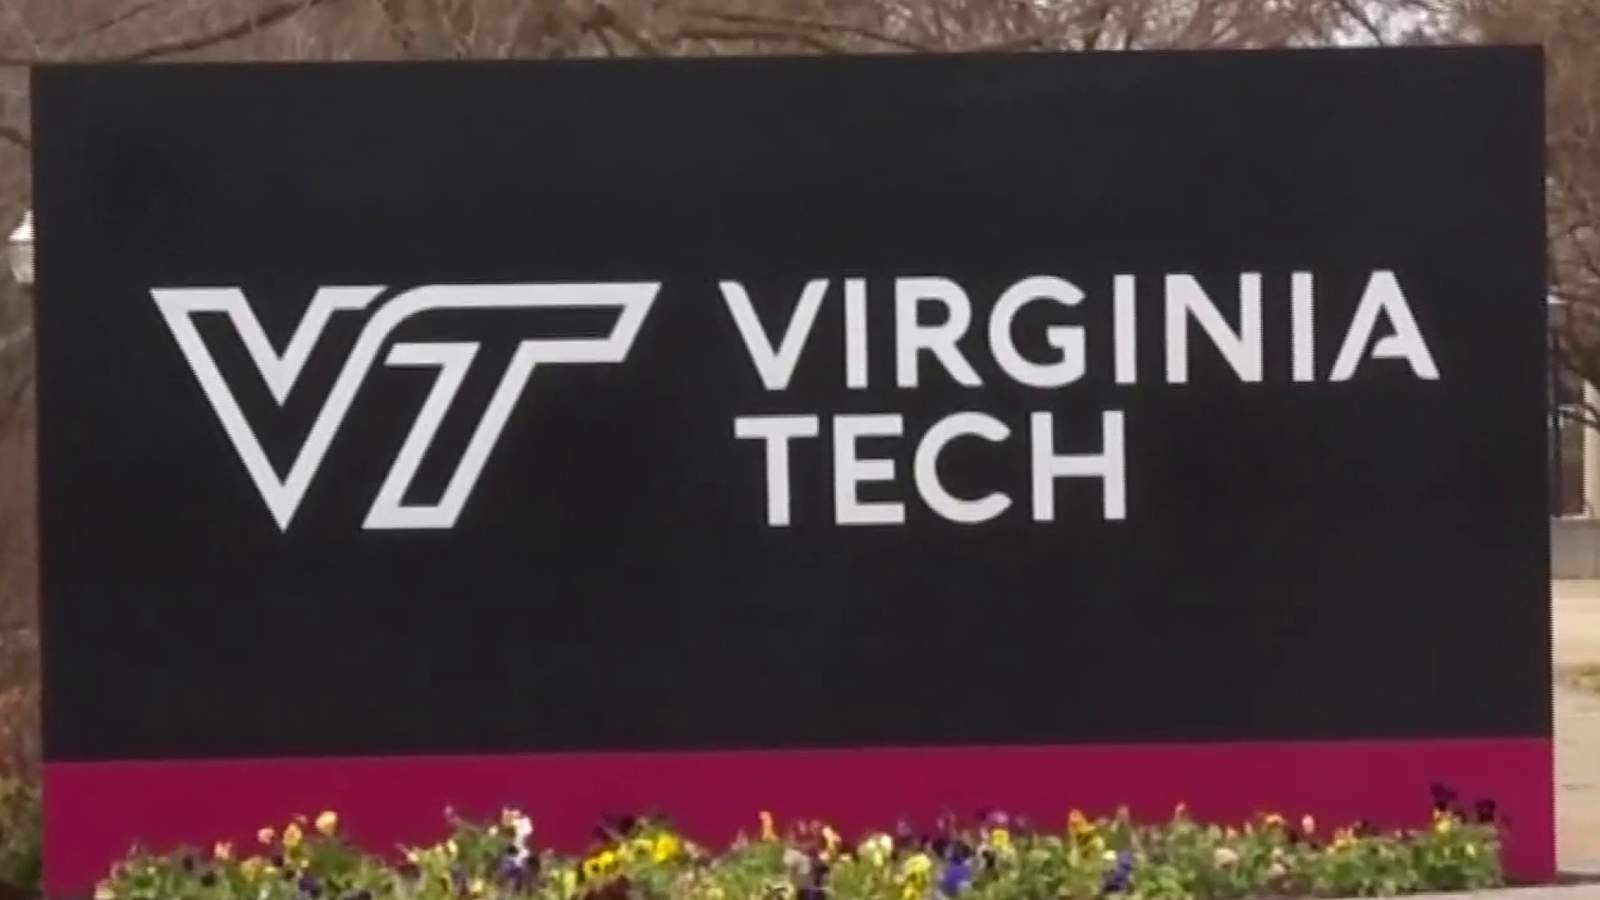 Virginia Tech is giving students back nearly $100 this semester